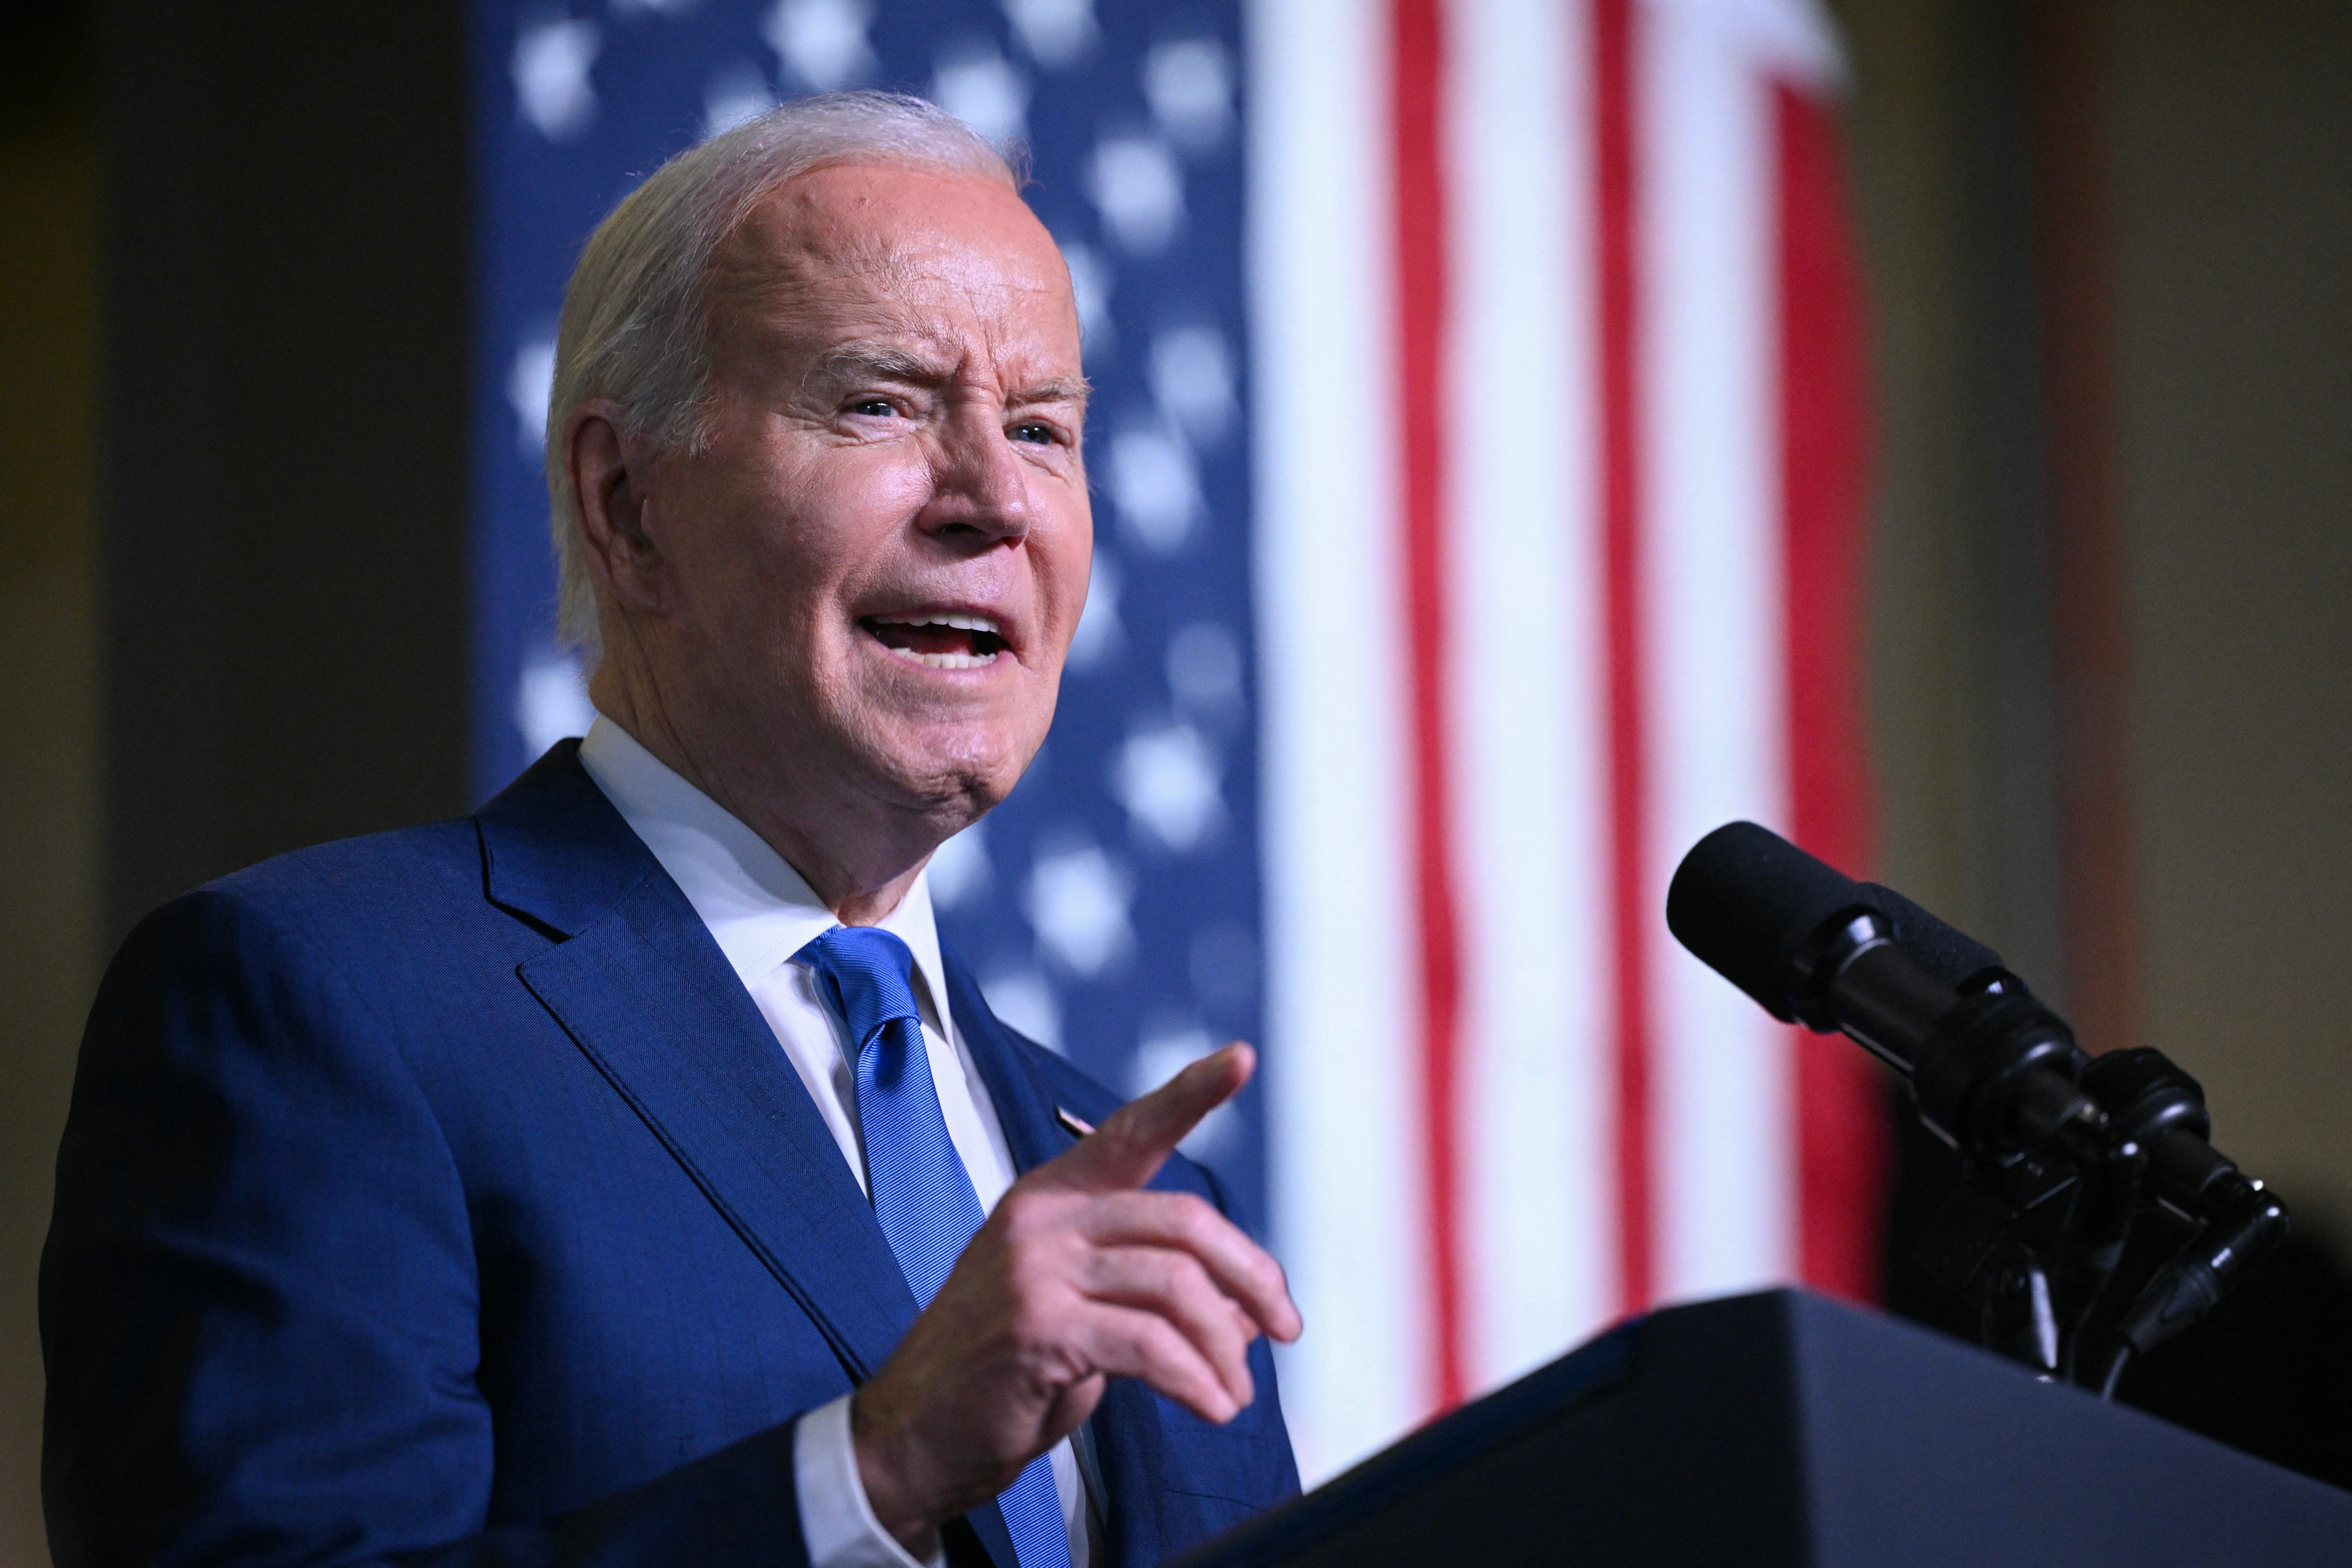 Great job, Biden! Social Security is going broke and debt payments are breaking the bank